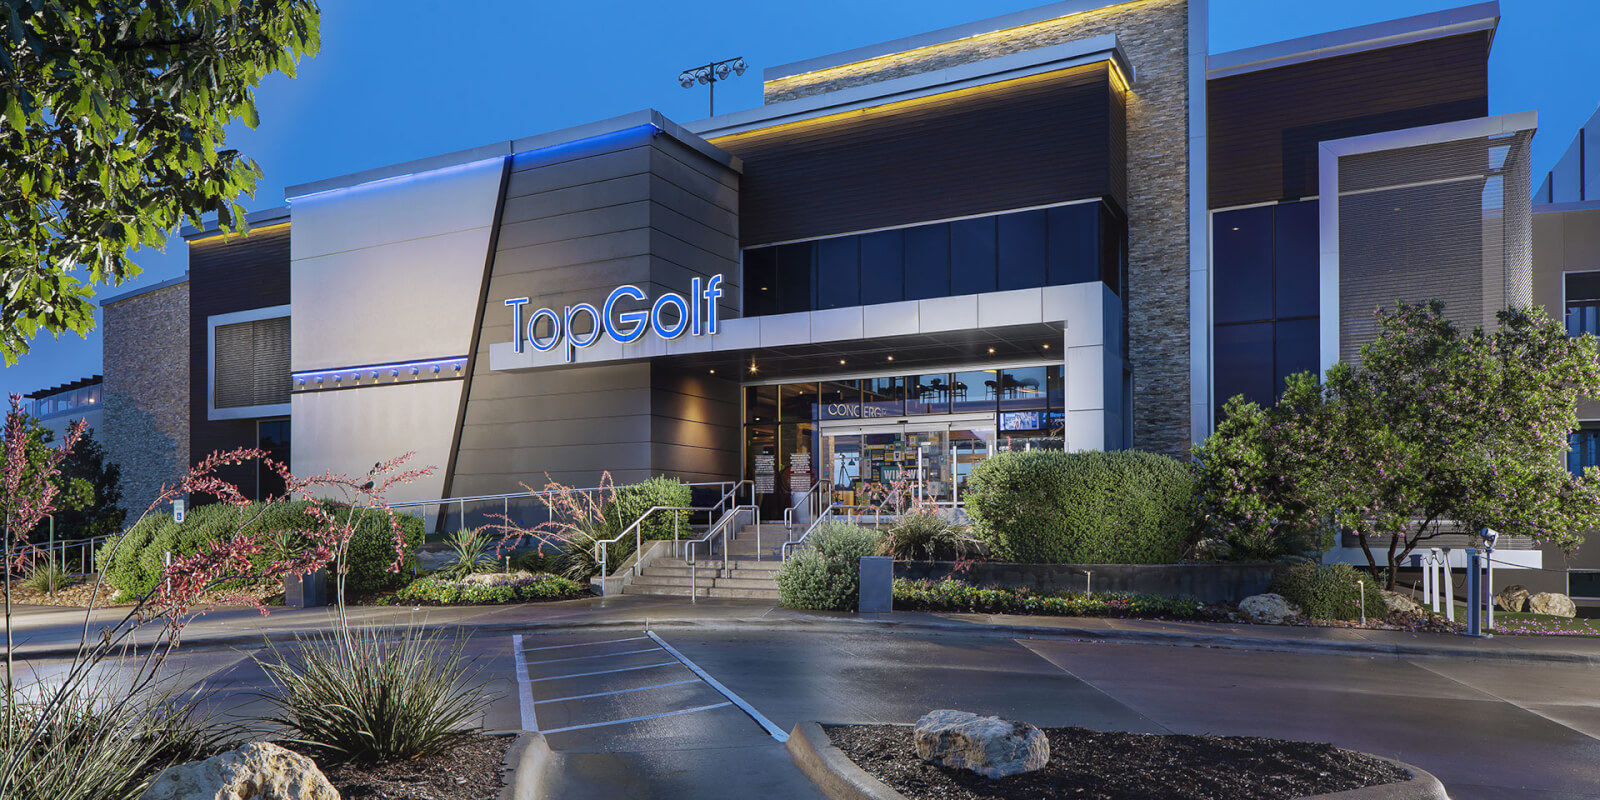 Everythings You Need To Know About The Top Golf In Austin, Texas